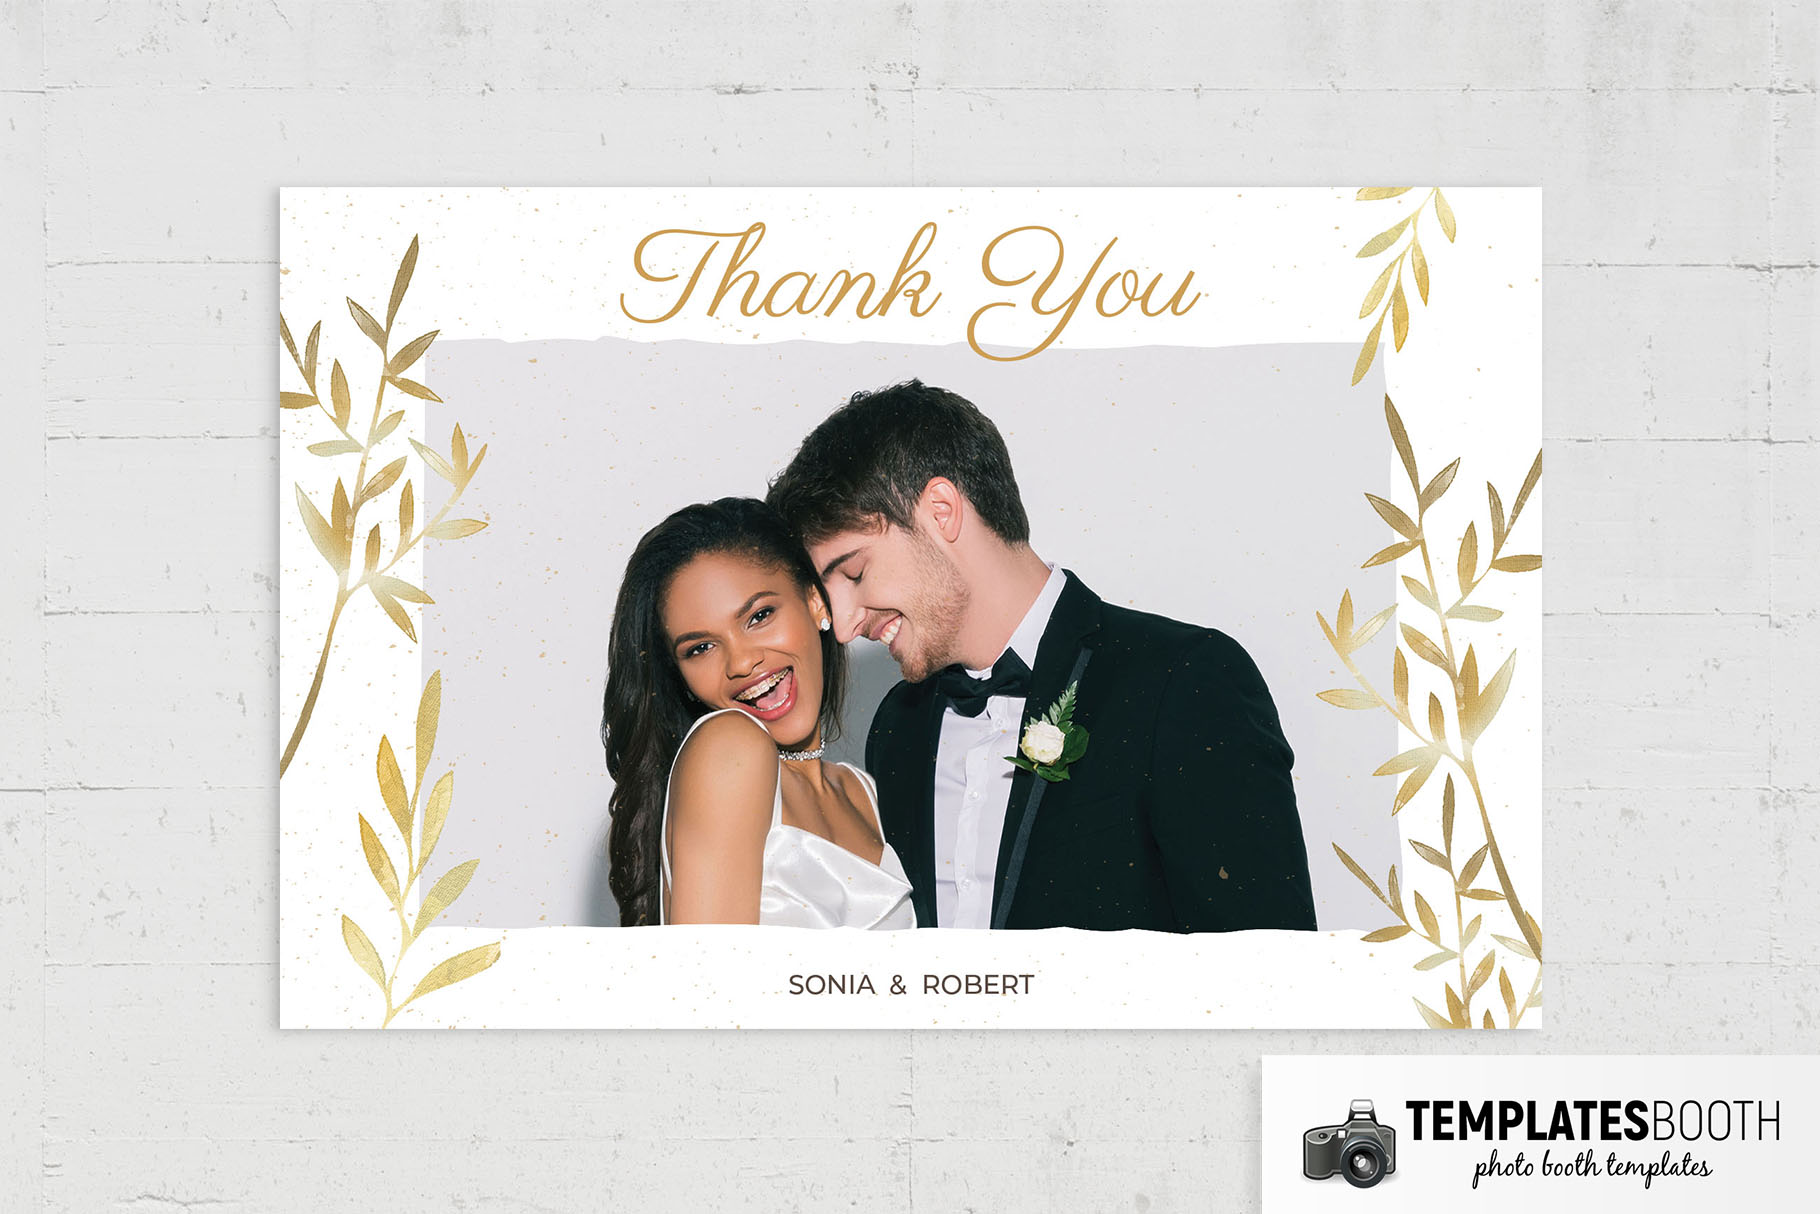 Free Wedding Photo Booth Template